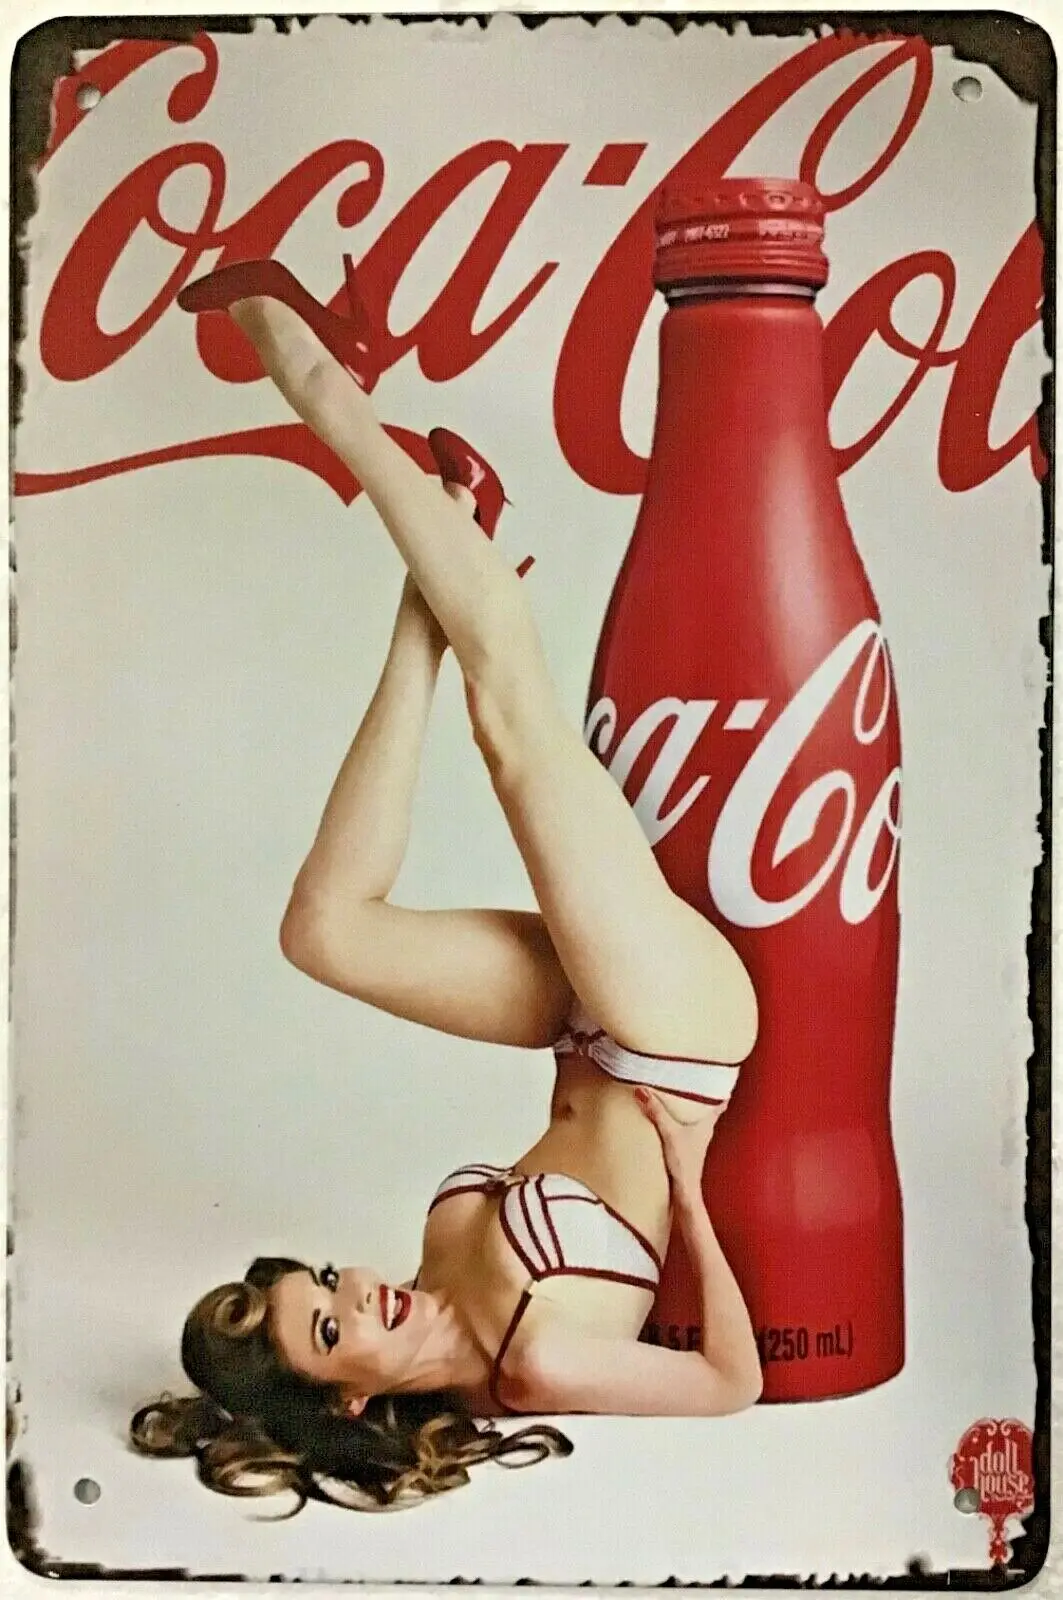 

Cola Coke Bottle Sexy Girl Vintage Metal Signs Tin Signs Poster for Home Bar Pub Club Kitchen Diner Man Cave Wall Decor